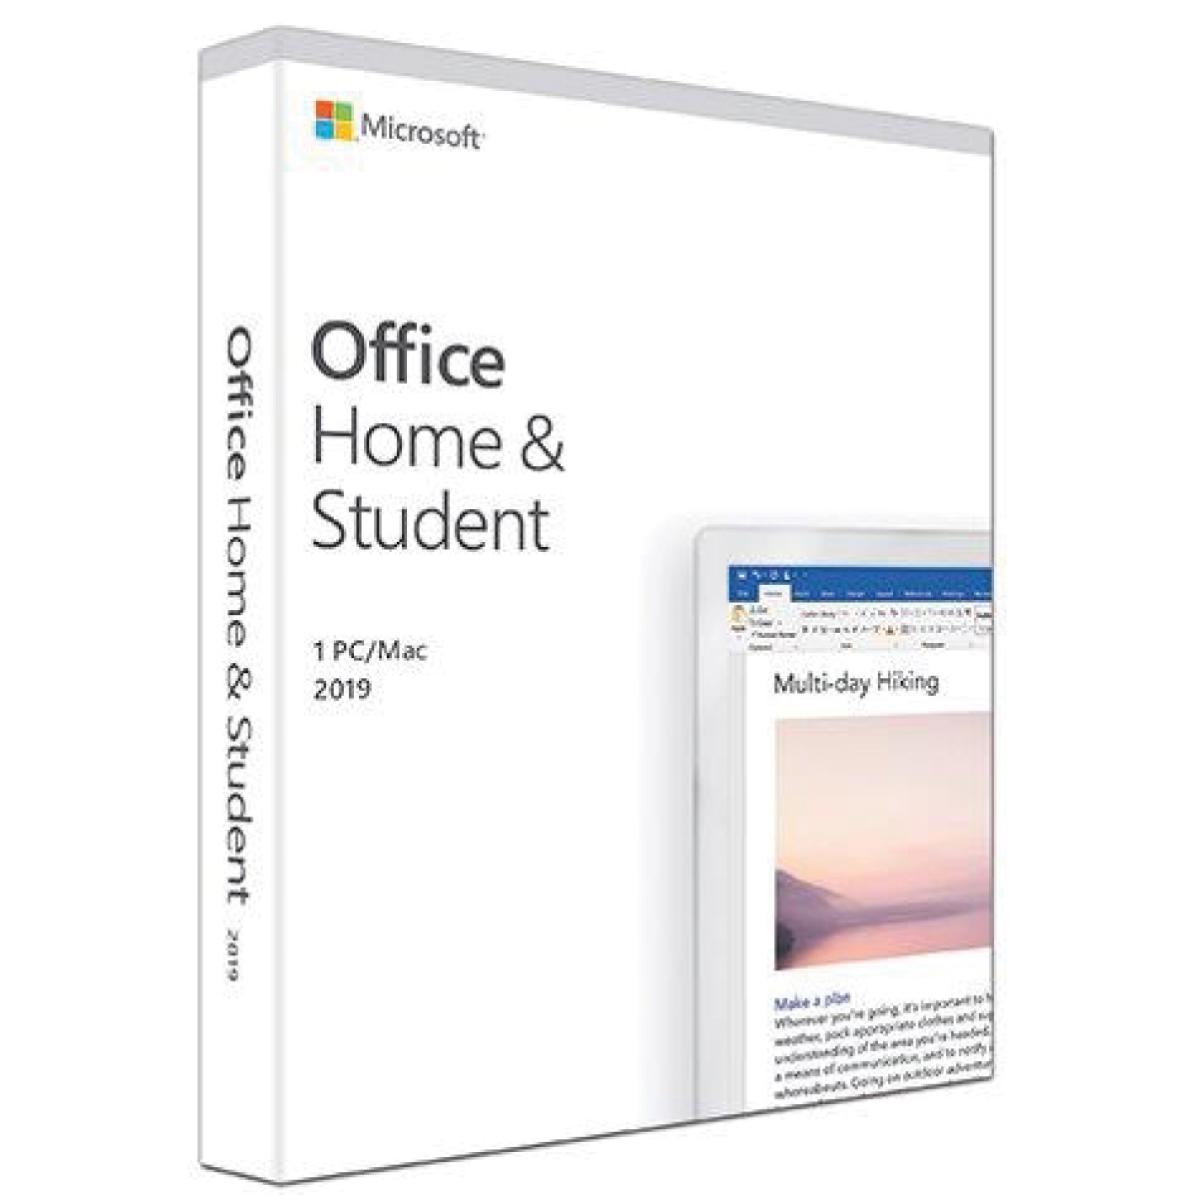 microsoft office home and business 2019 mac reviews